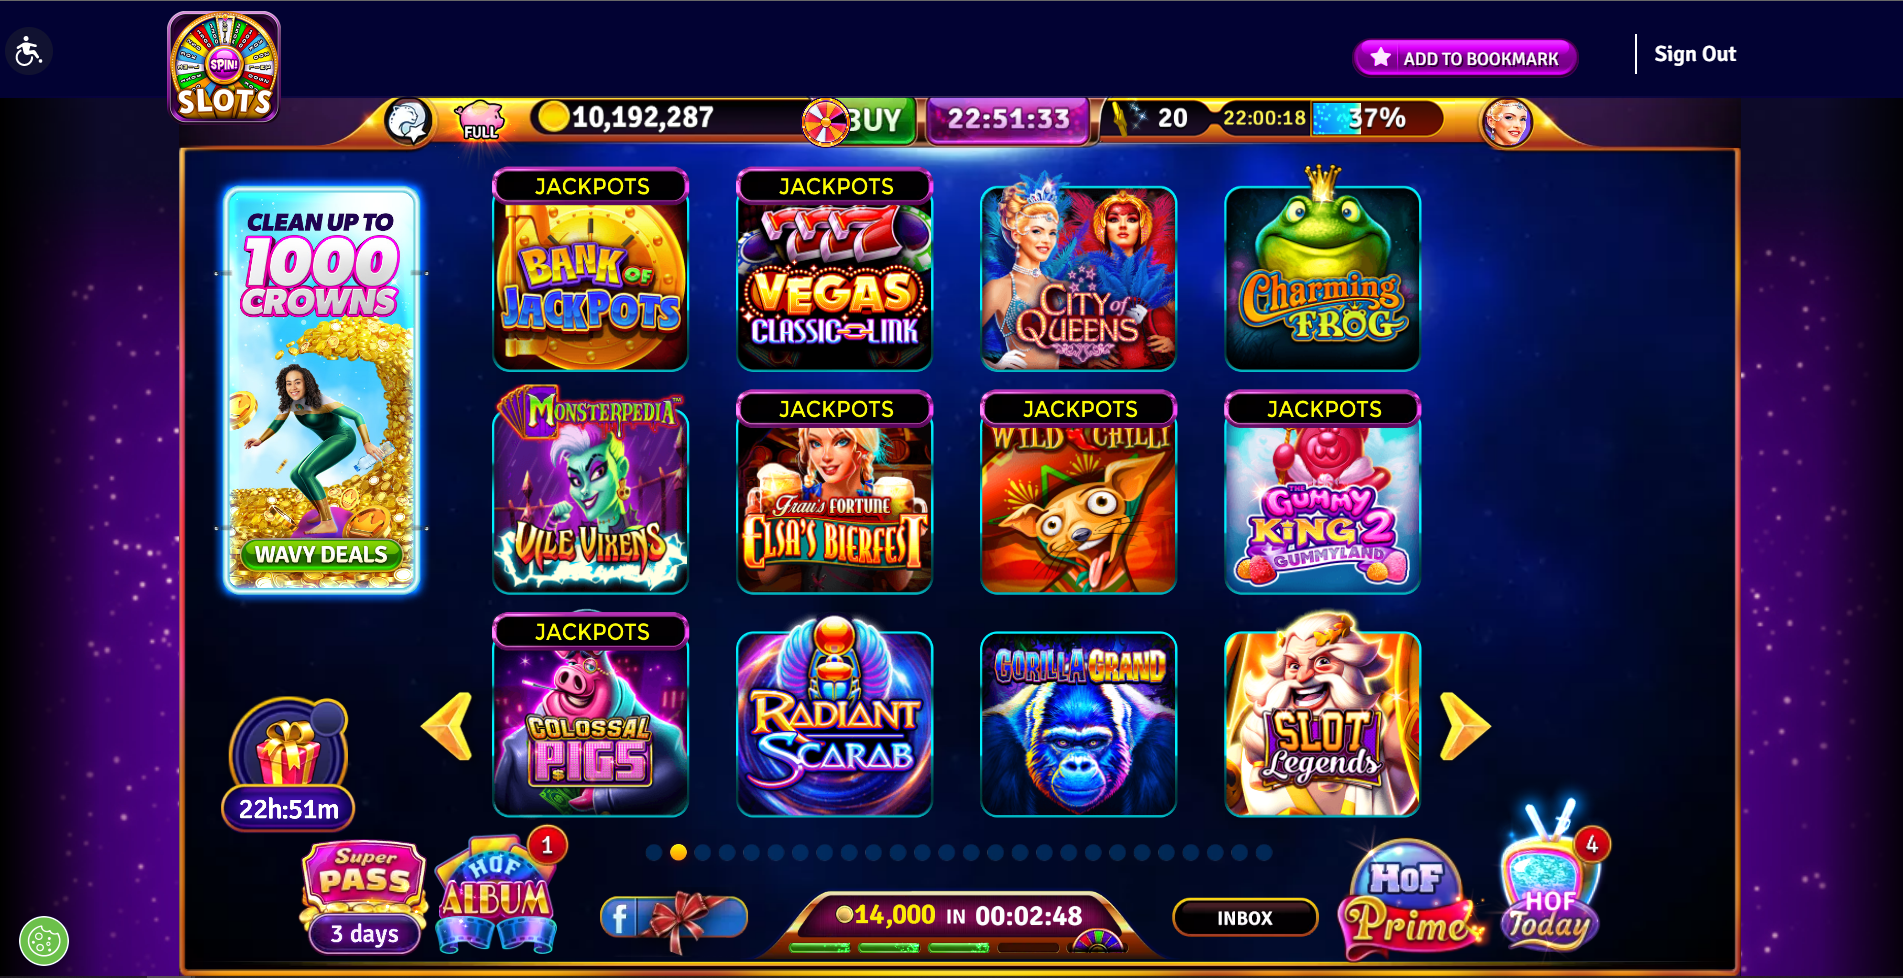 Why Should You Play the Jackpot Slots on House of Fun?